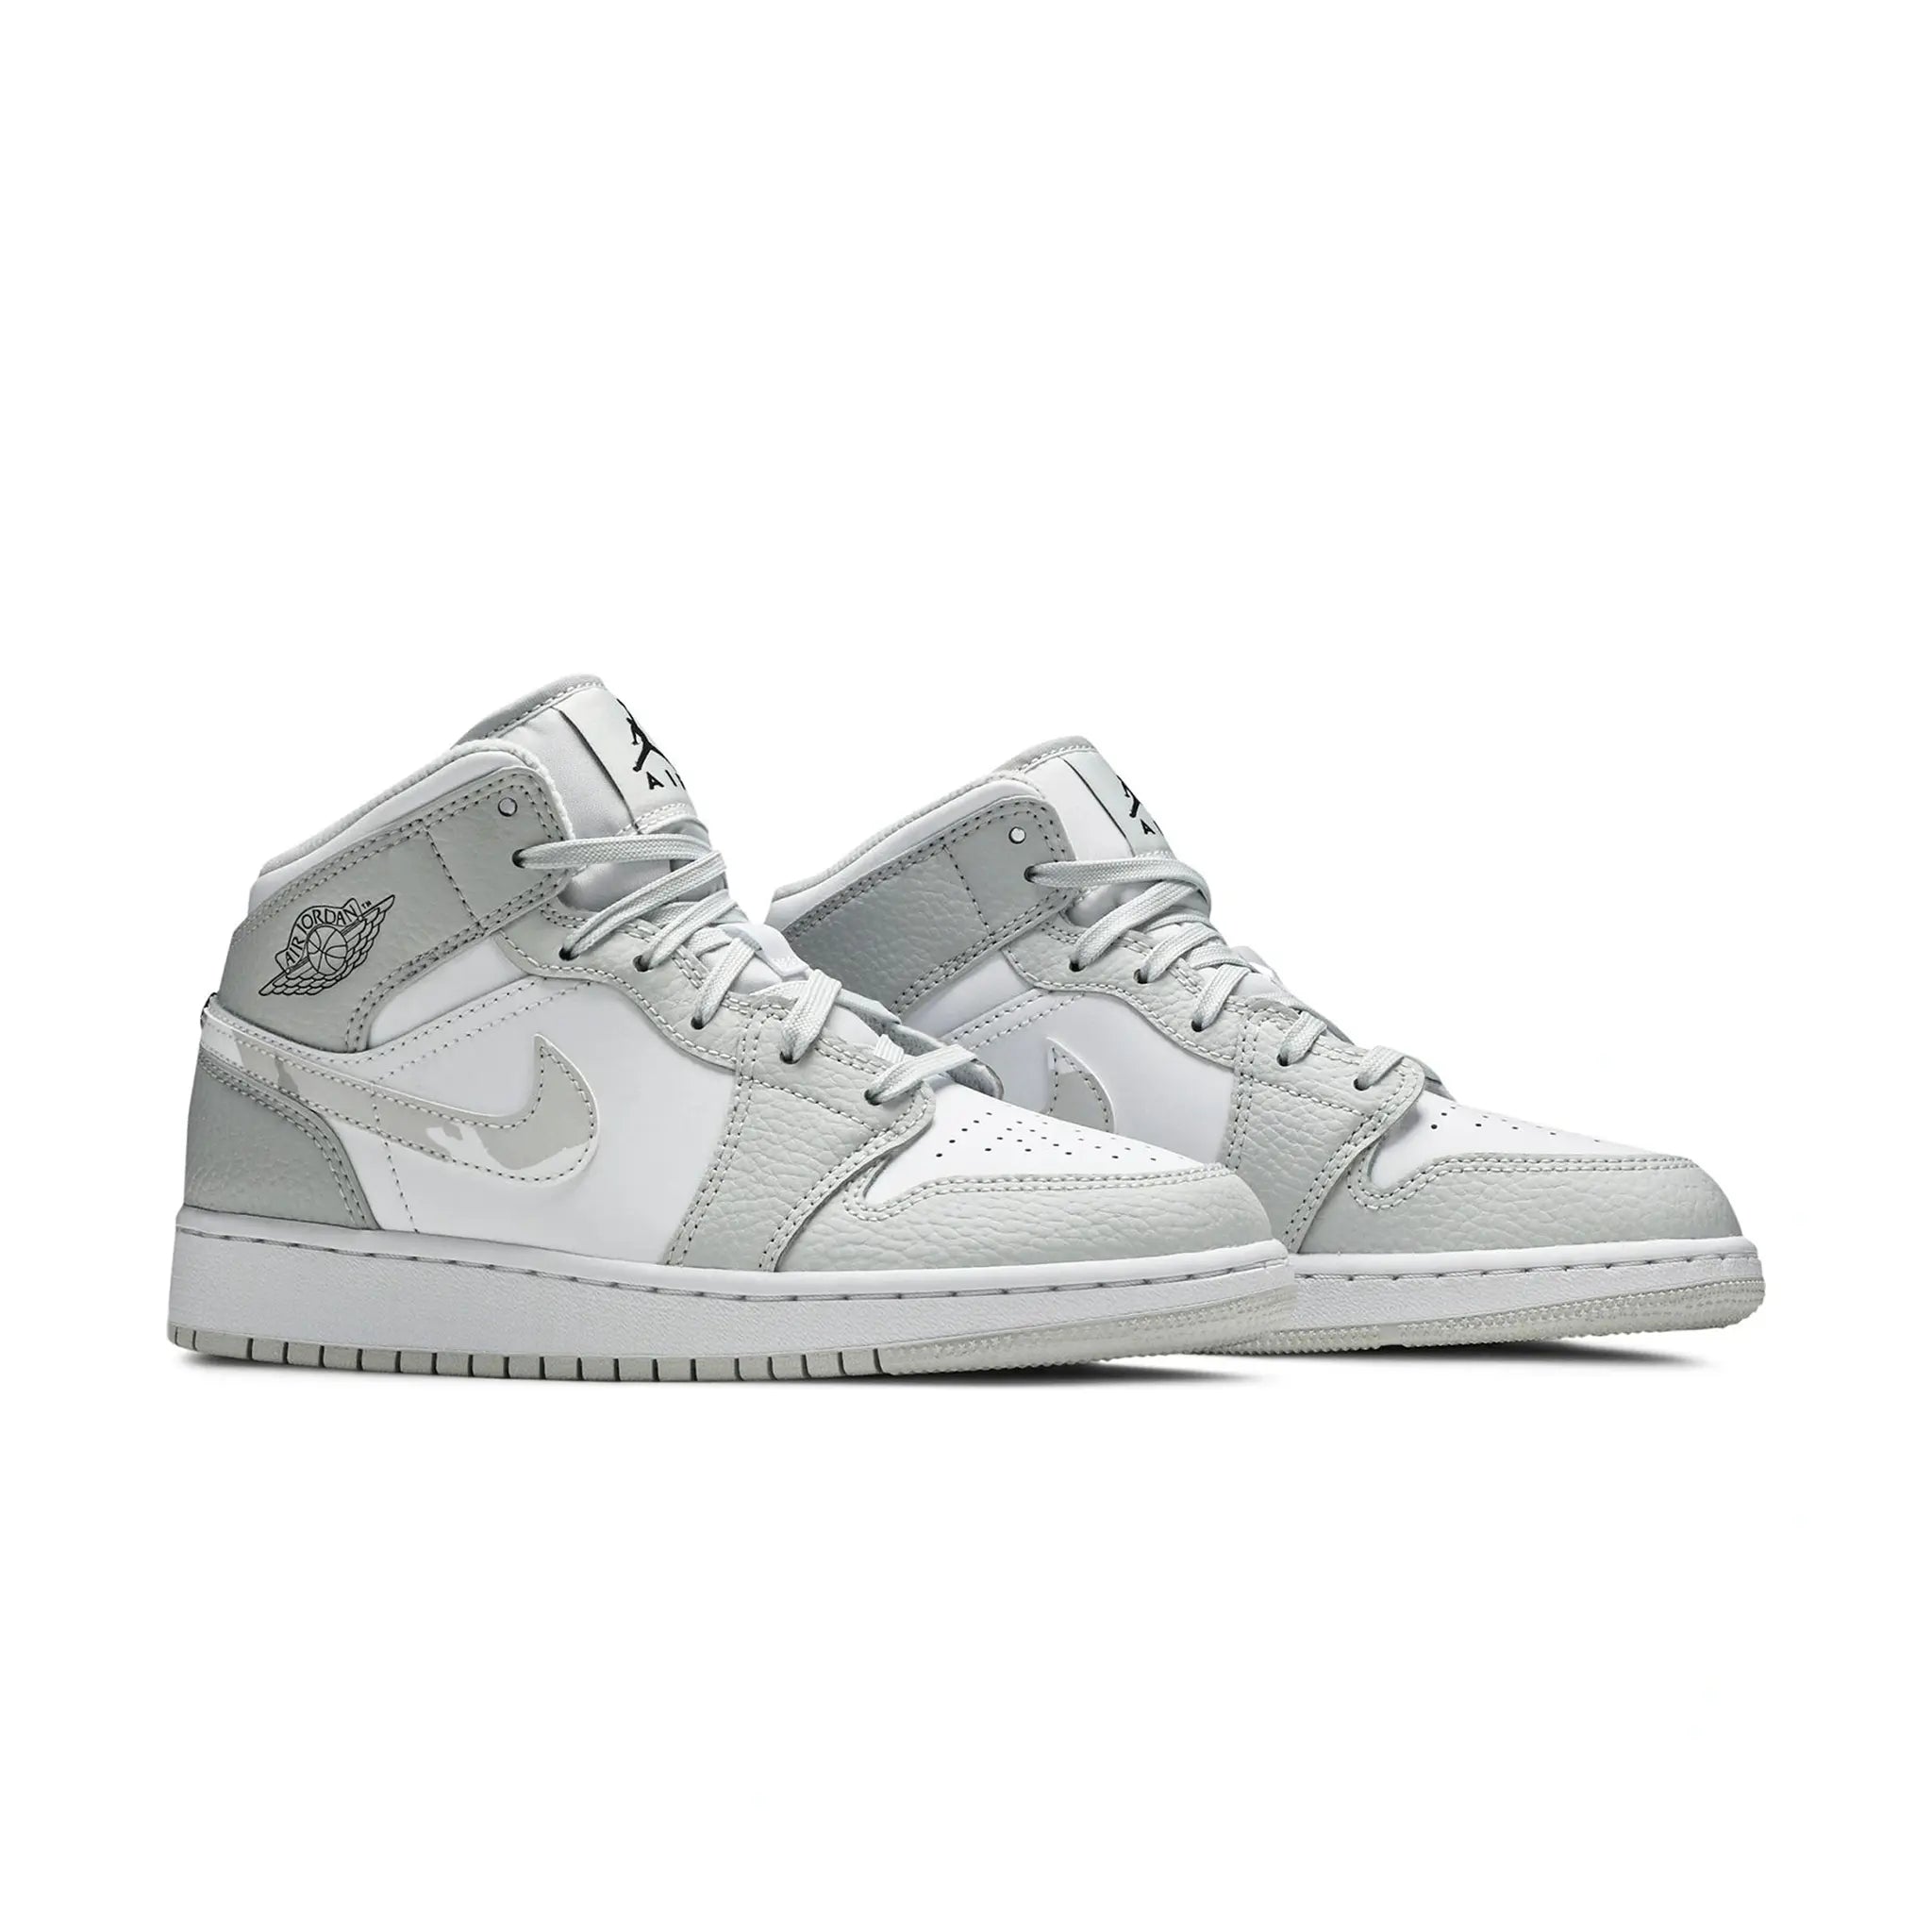 Front side view of Air Jordan 1 Mid Grey Camo (GS) DD3235-100